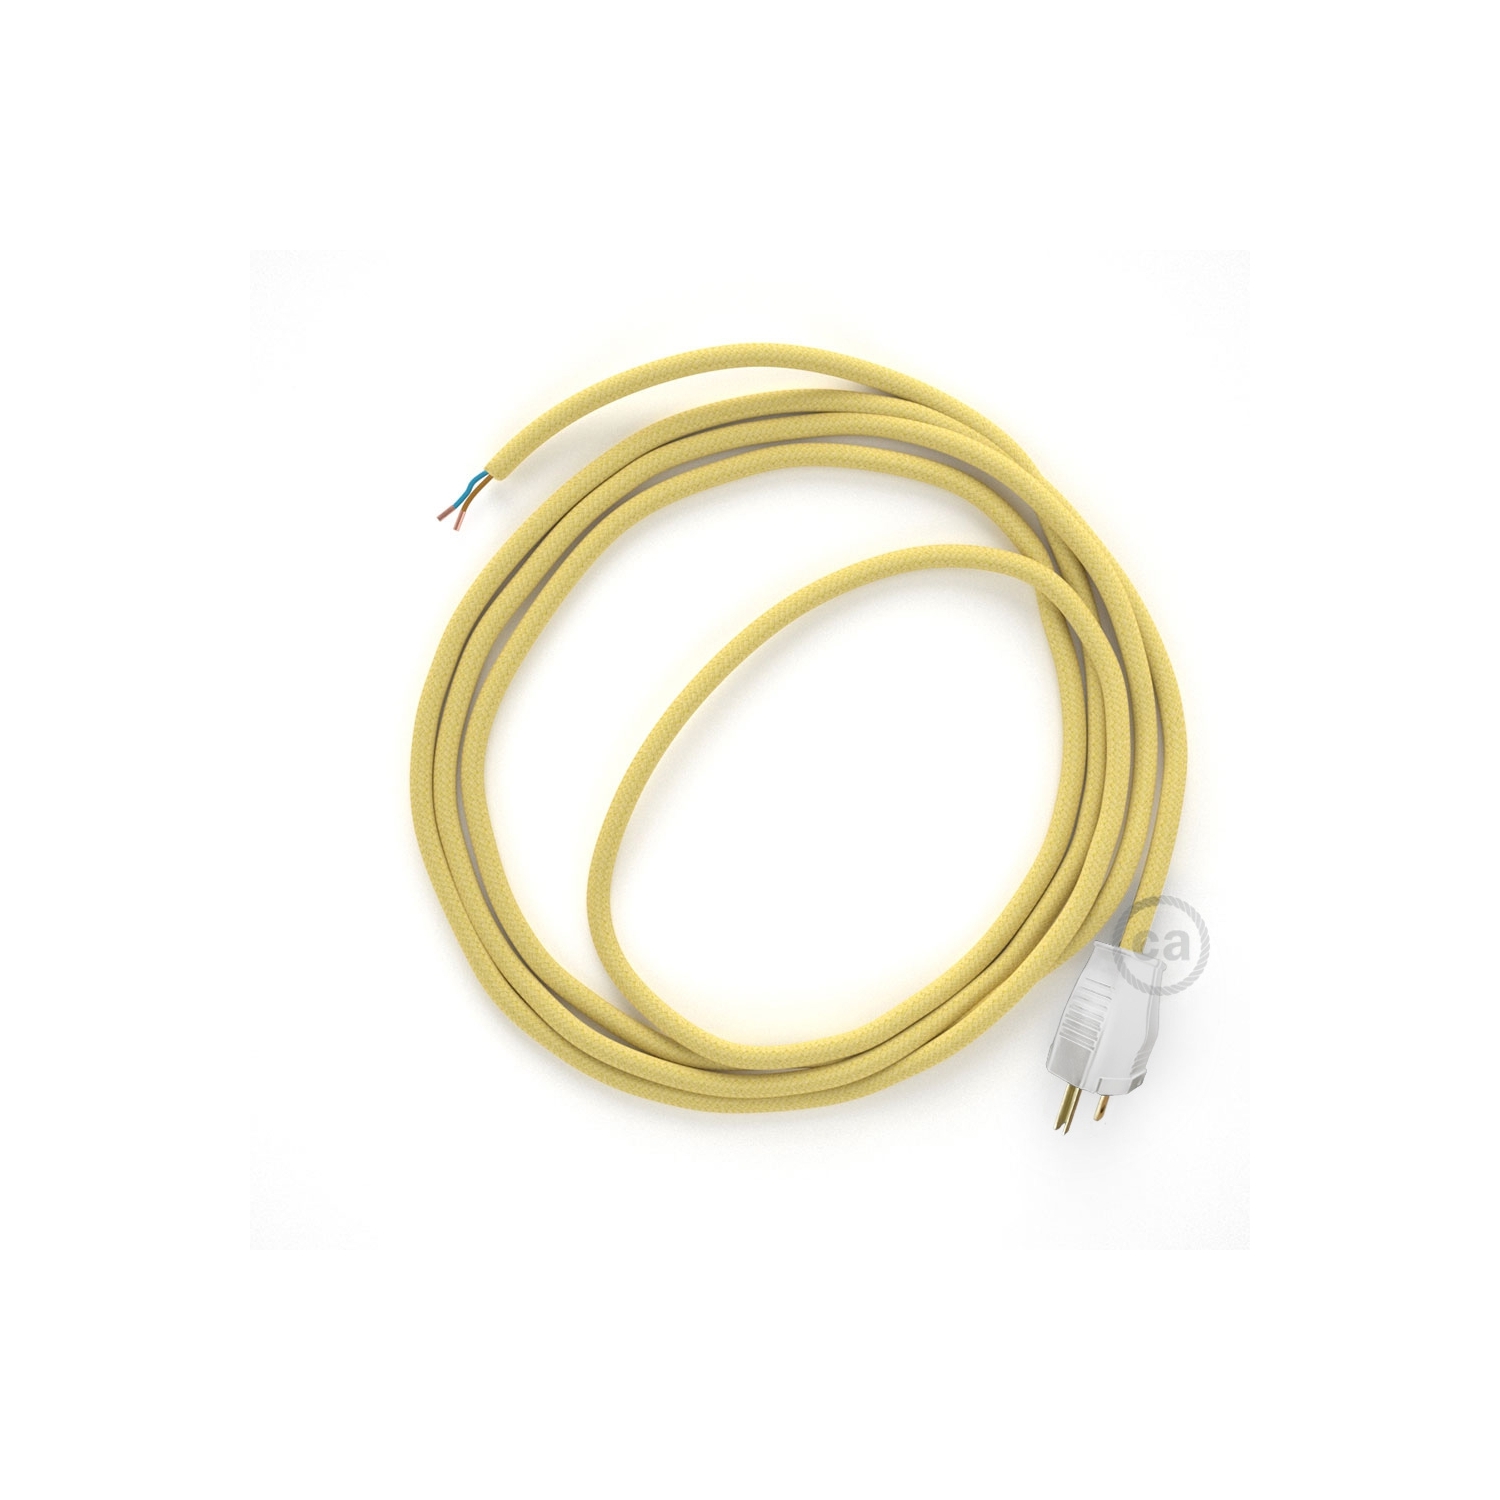 Cord-set - RC10 Pale Yellow Cotton Covered Round Cable